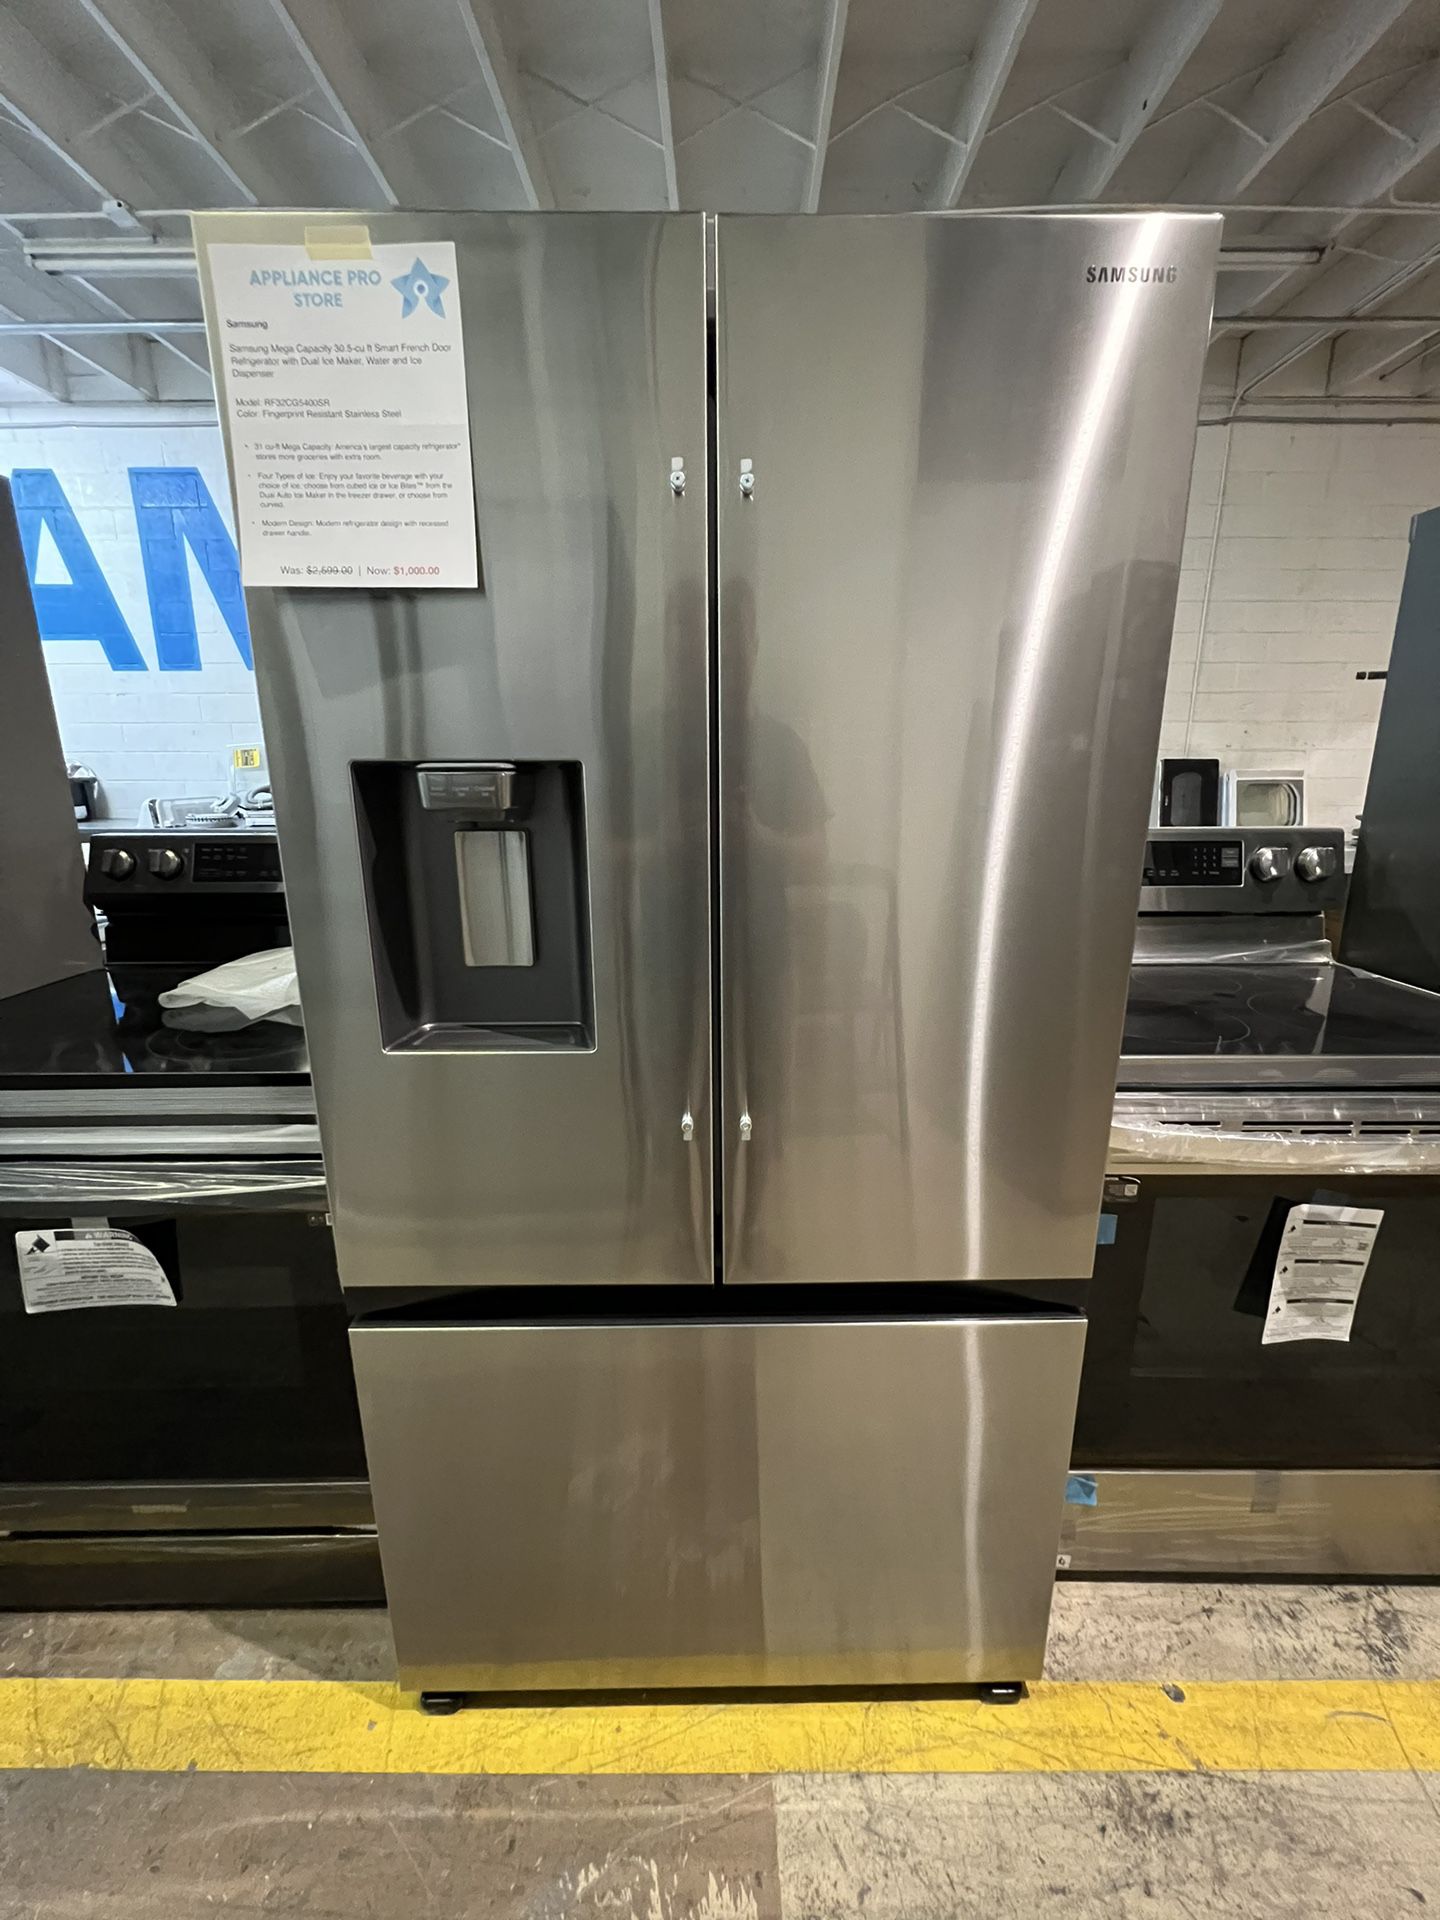 🔥New🔥 Samsung Mega Capacity 30.5-cu ft Smart French Door Refrigerator with Dual Ice Maker, Water and Ice Dispenser